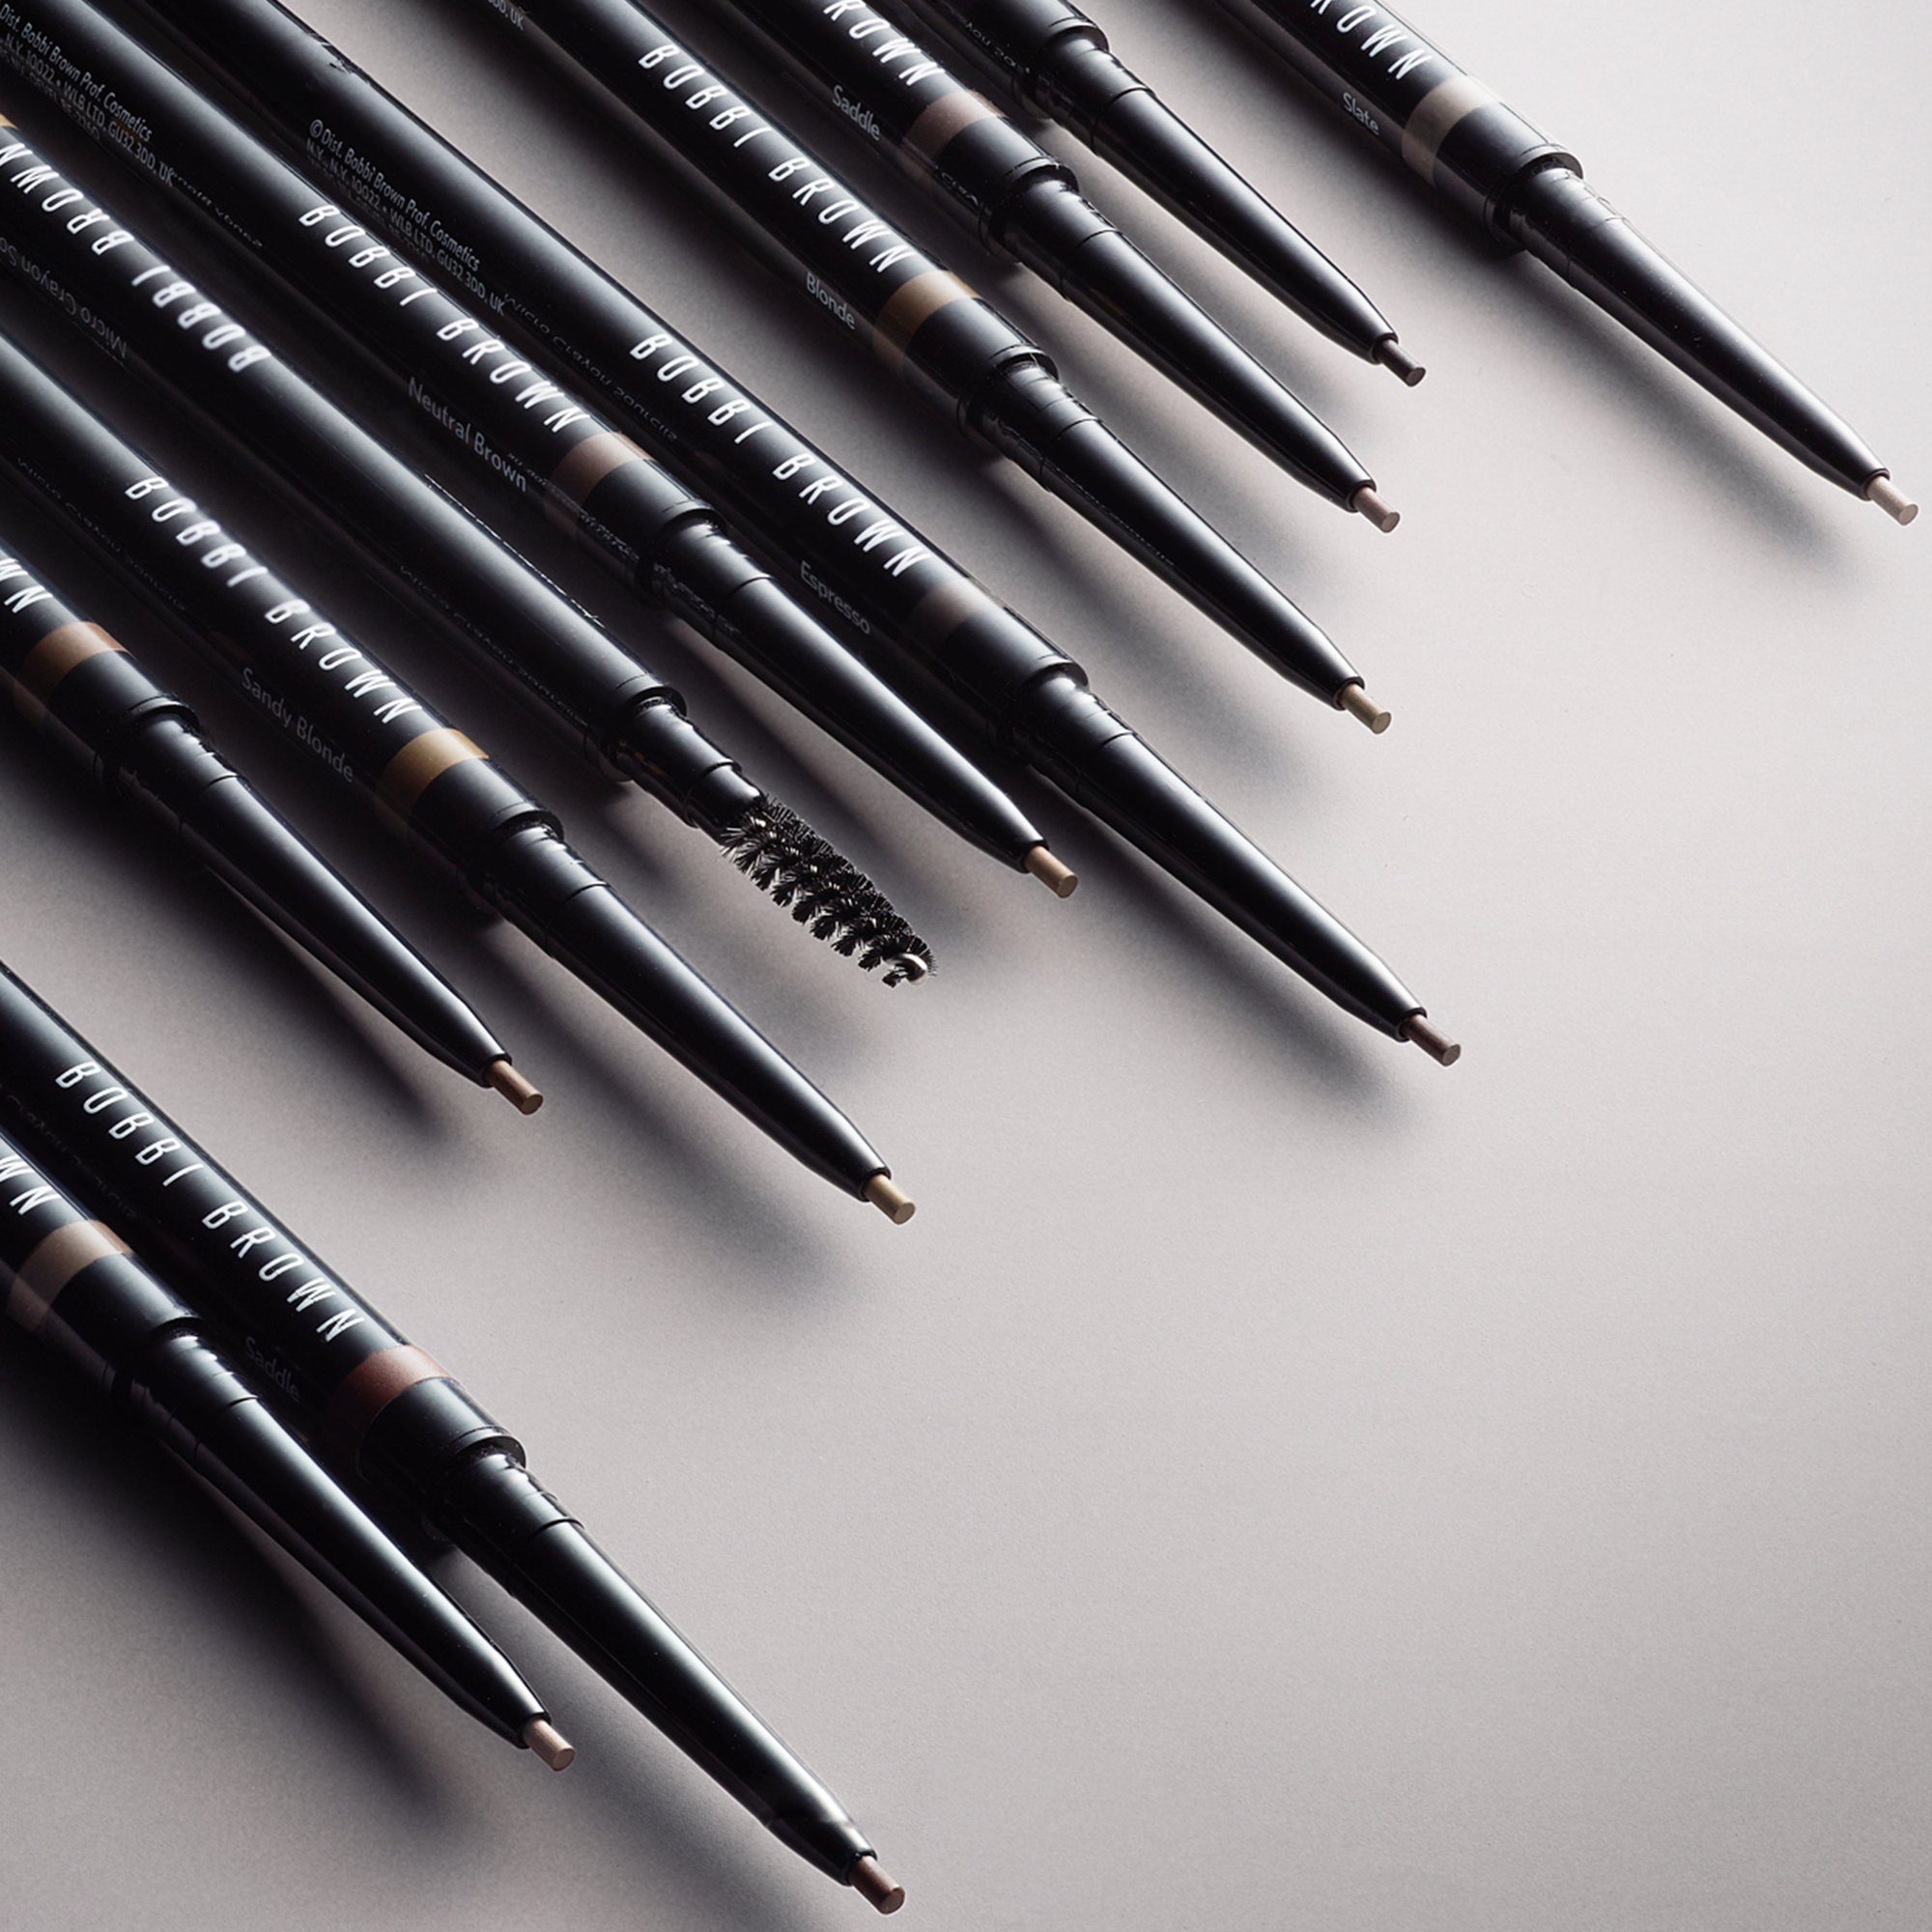 the bobbi brown micro brow pencil is the one